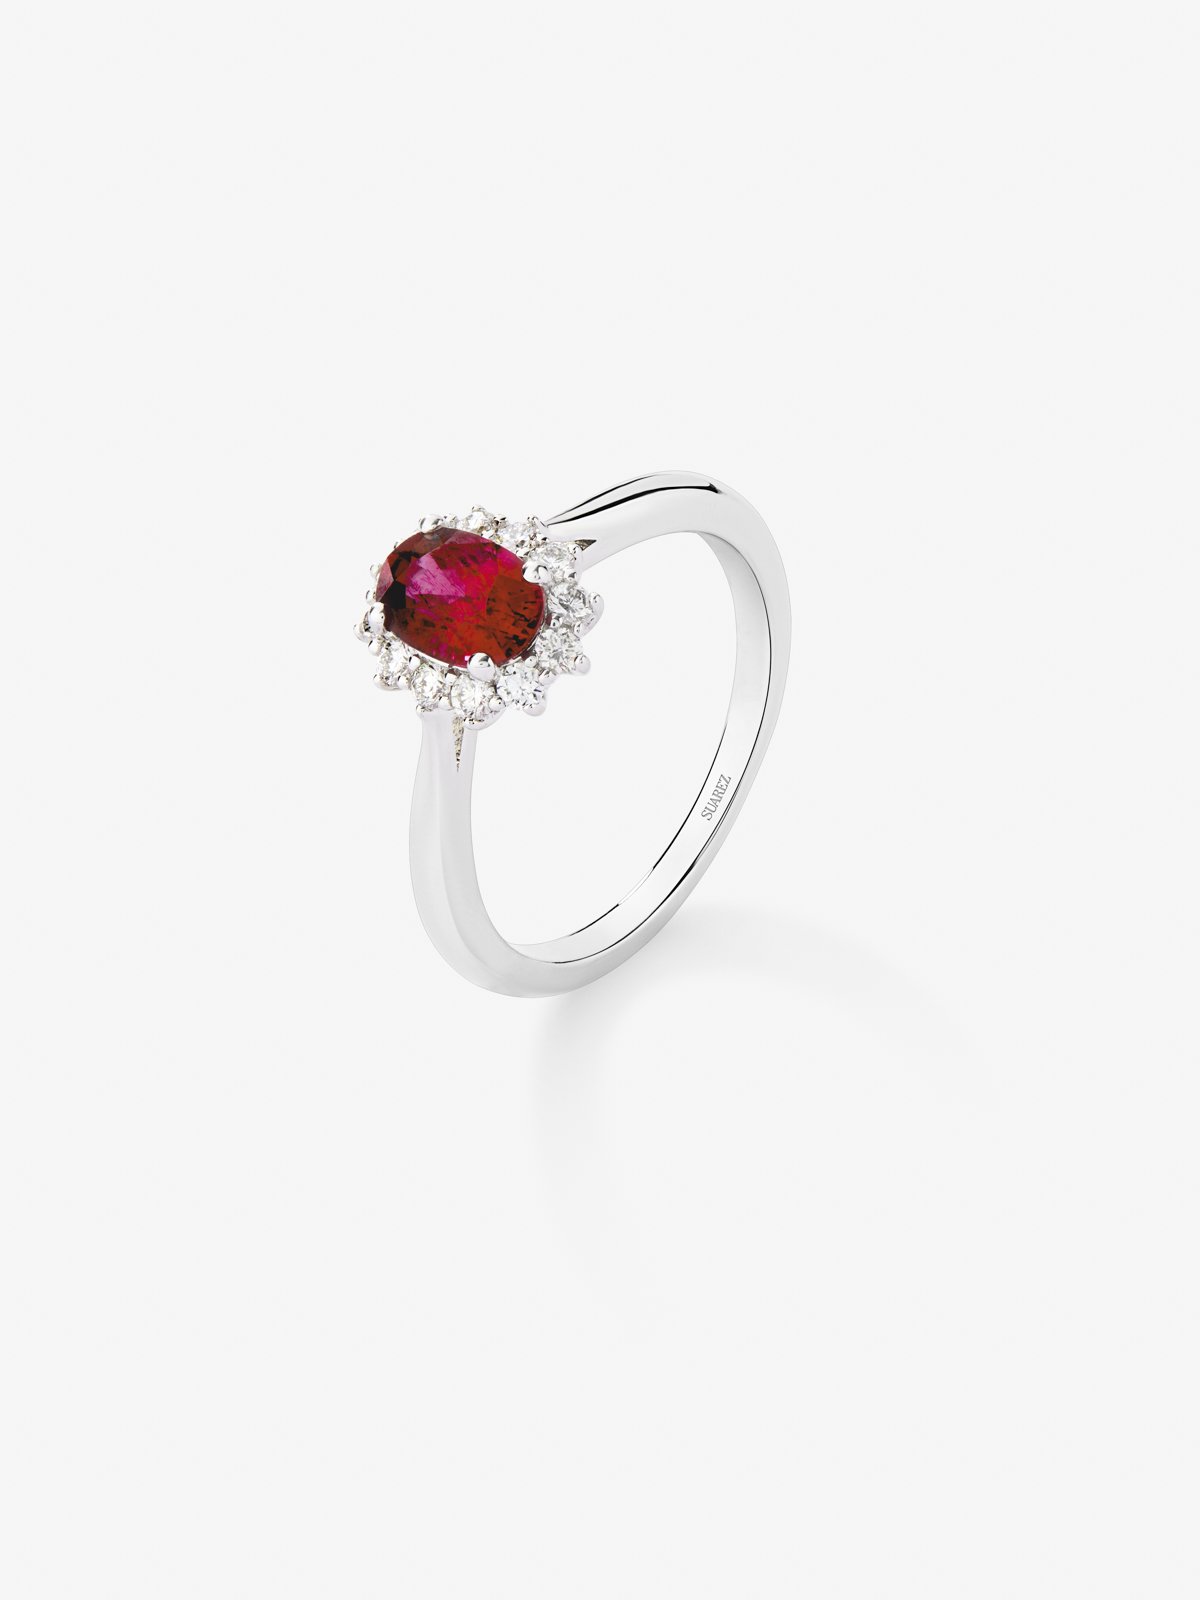 18K White Gold Ring with Red Red Vivid in 1.24 cts oval size and white diamonds of 0.25 cts